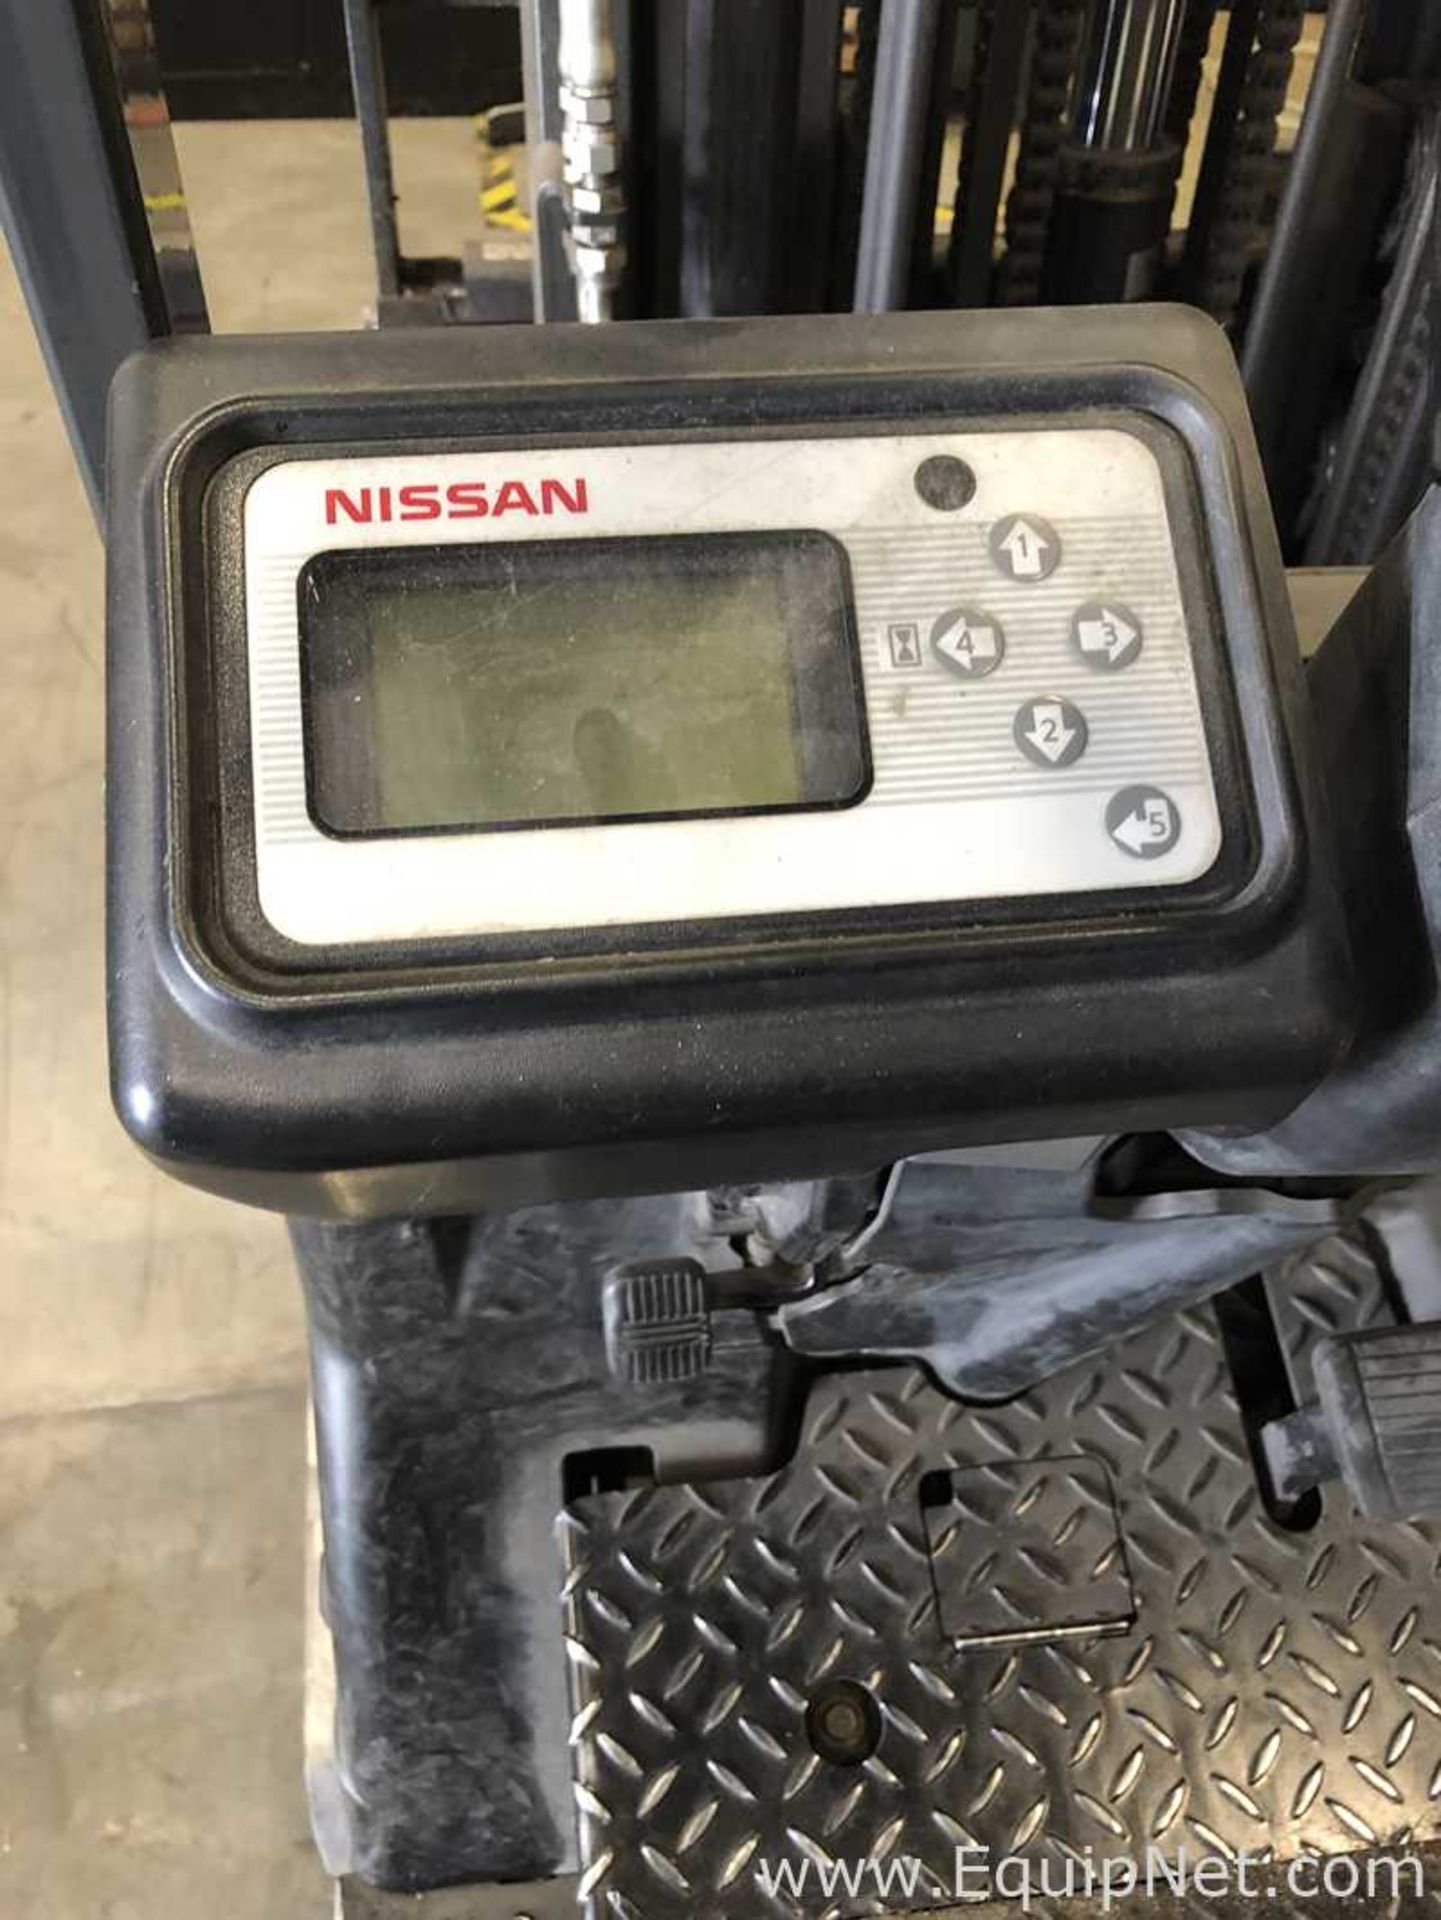 Nissan CK1B1L18S Electric 3500 Pound Fork Lift - Image 3 of 12